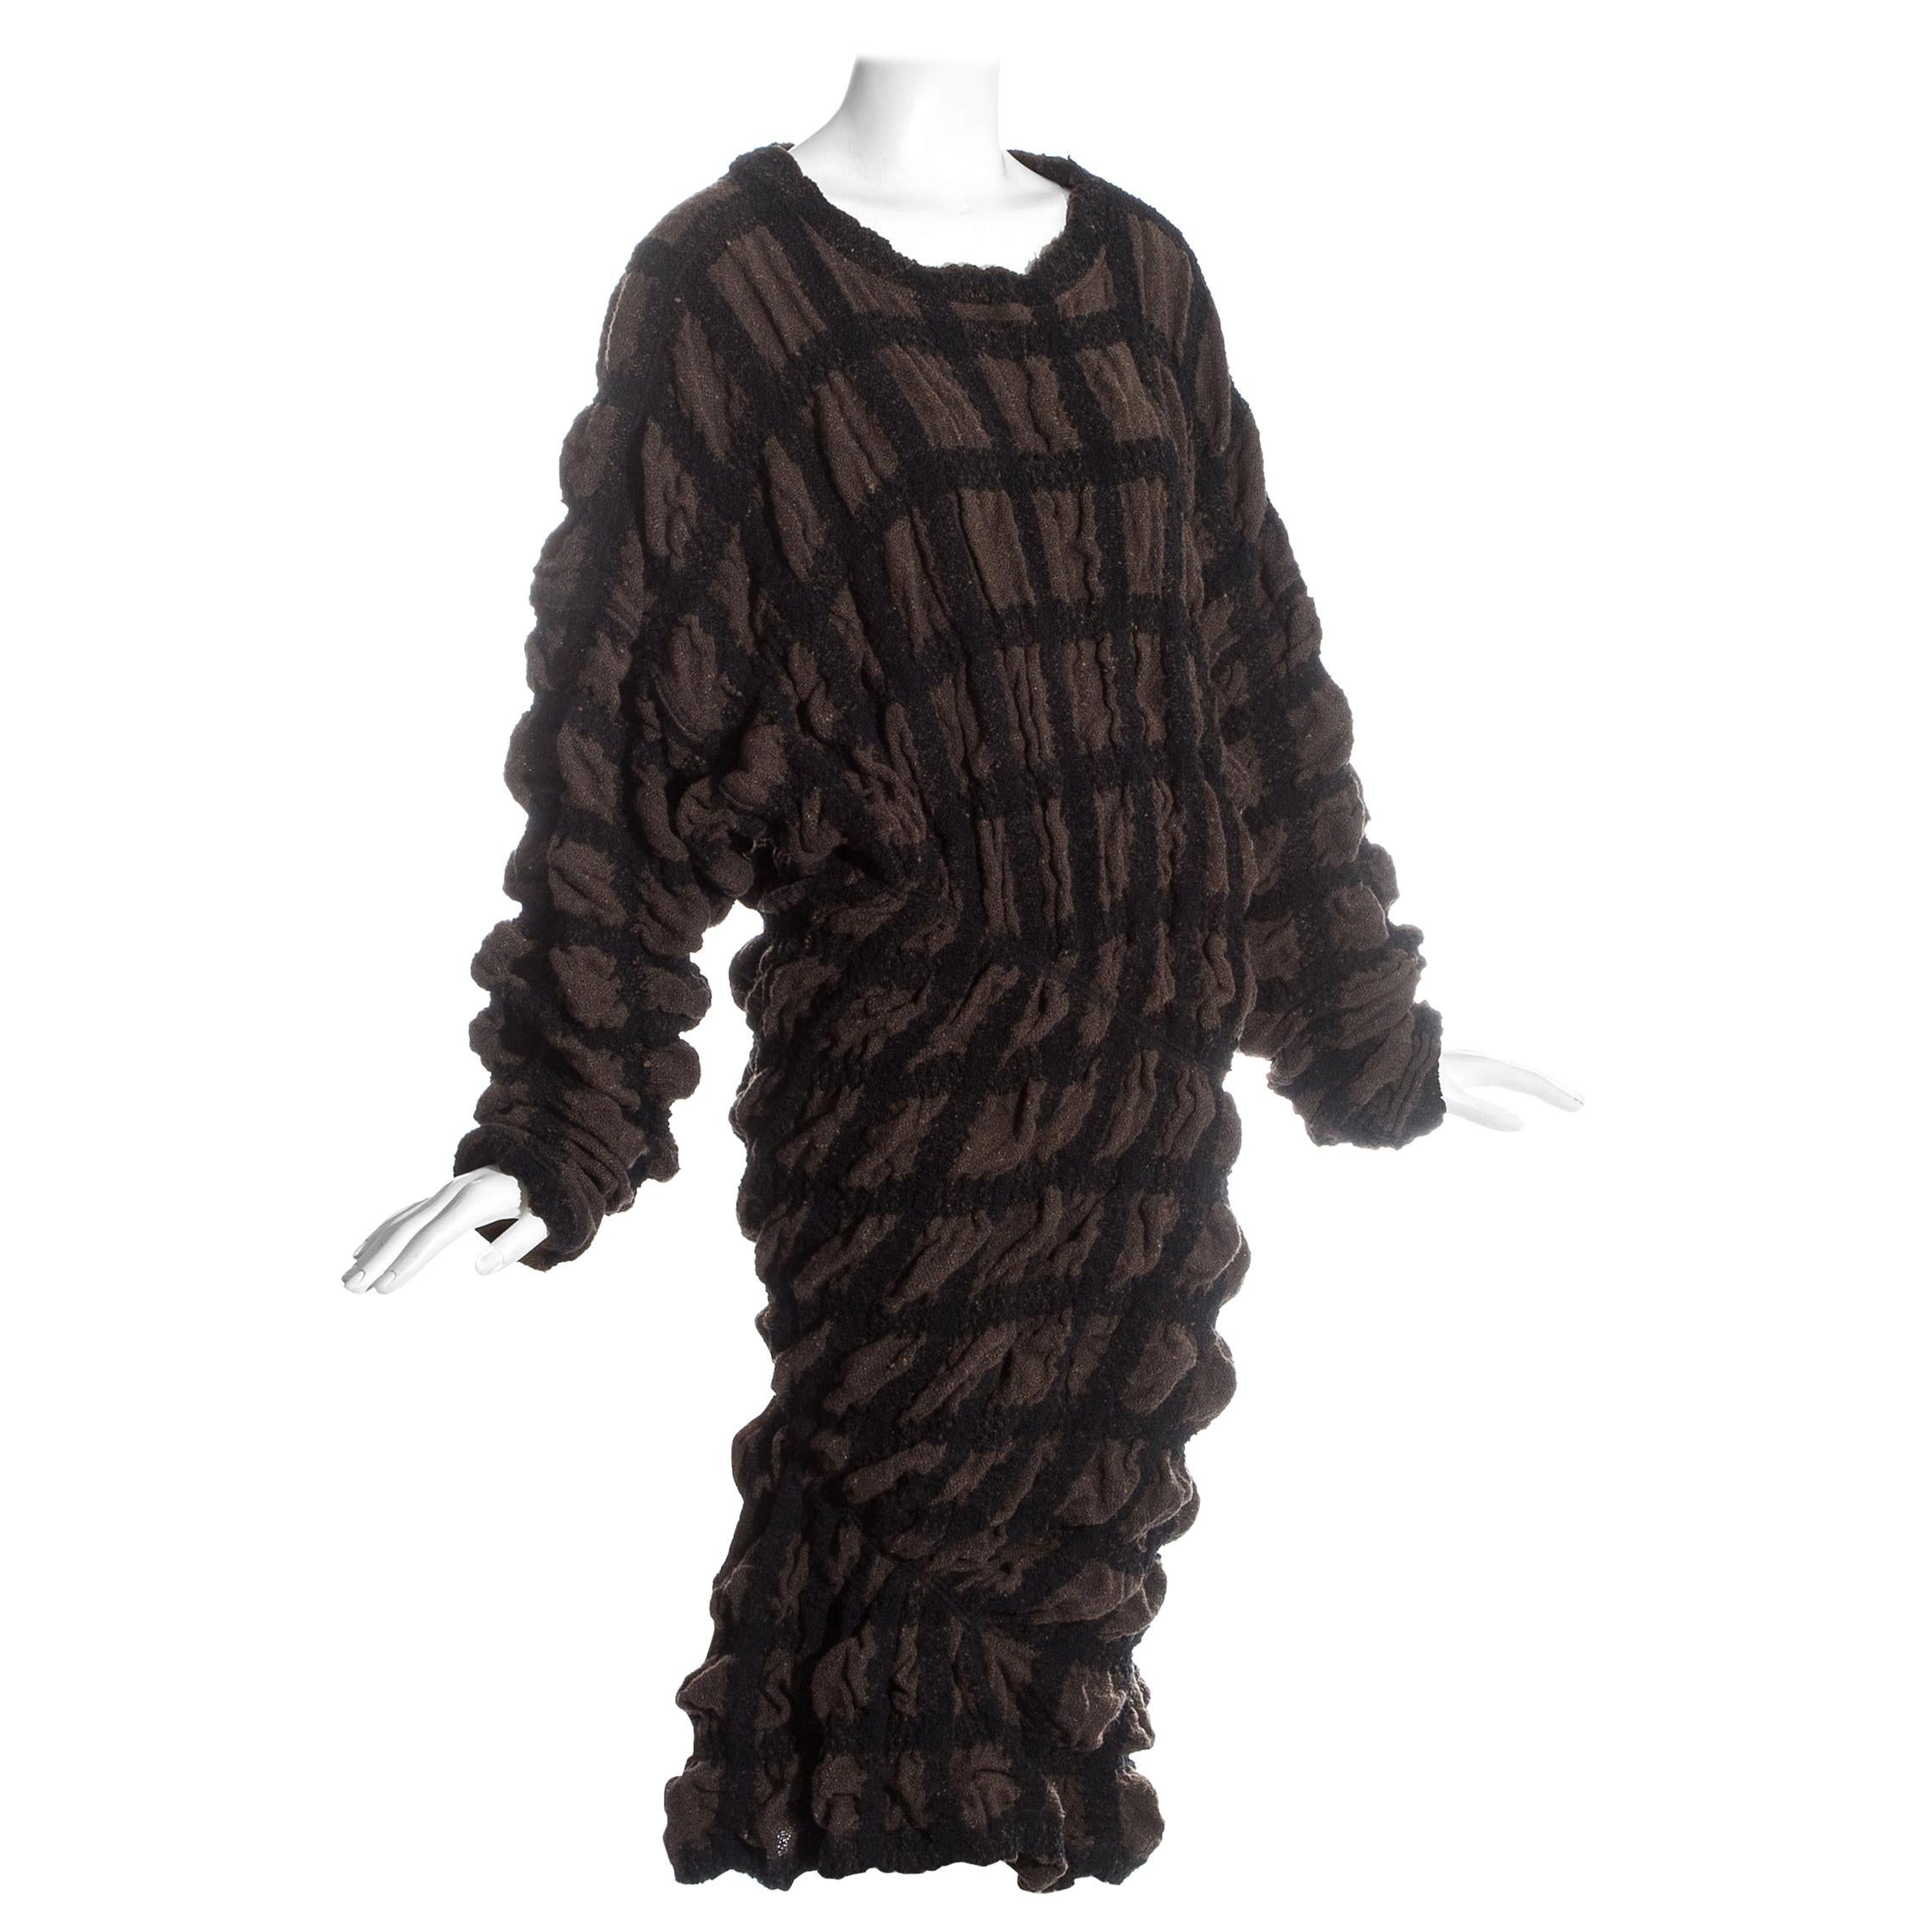 Issey Miyake brown checked wool sweater dress with elastic binding, fw 1985